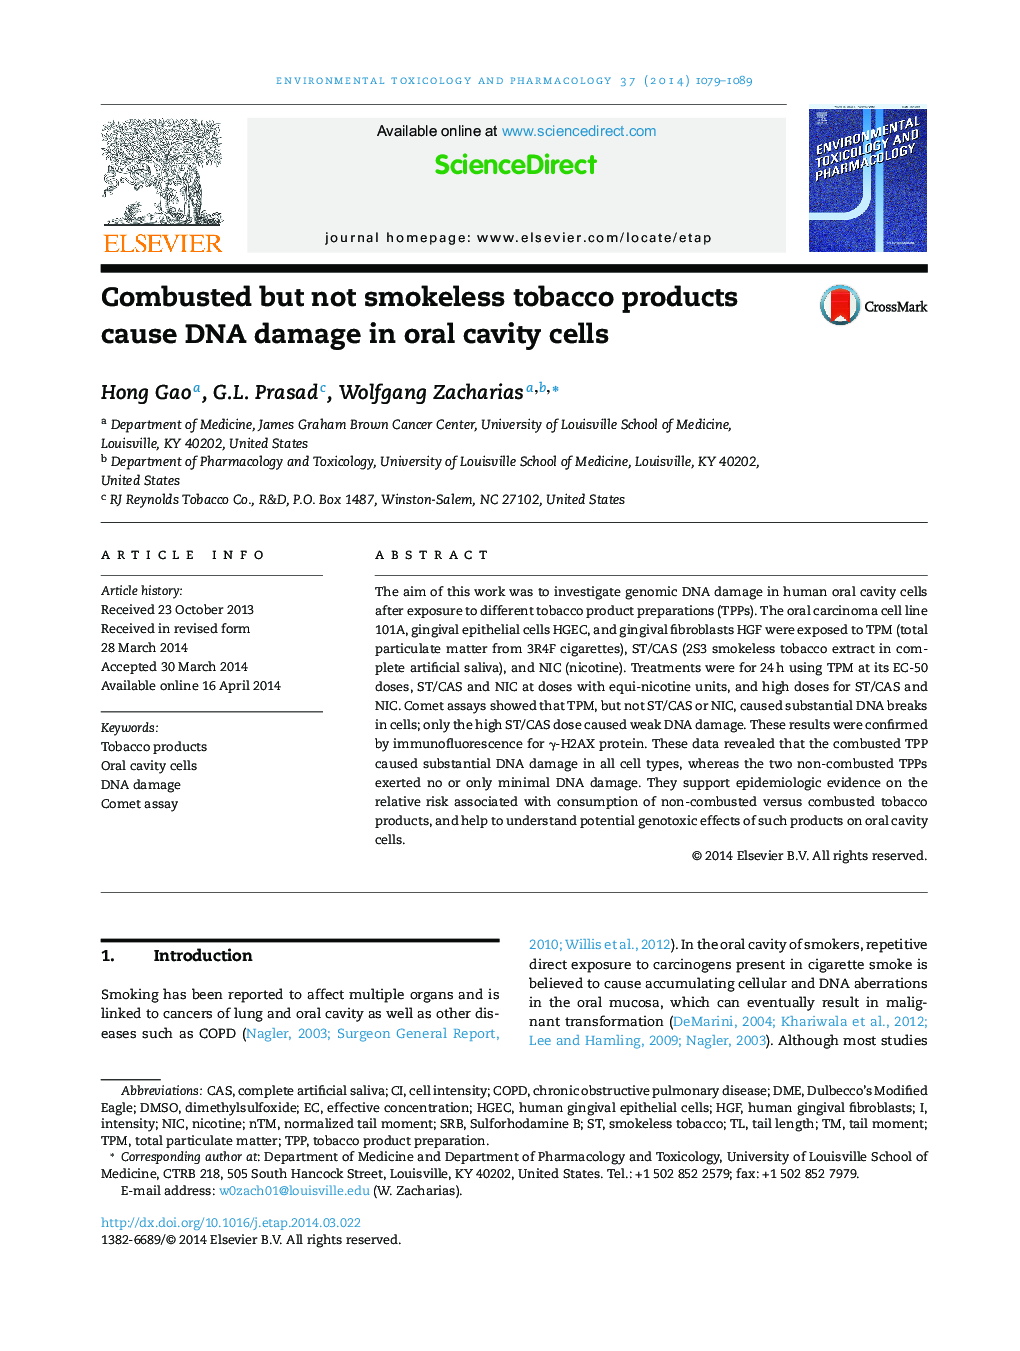 Combusted but not smokeless tobacco products cause DNA damage in oral cavity cells